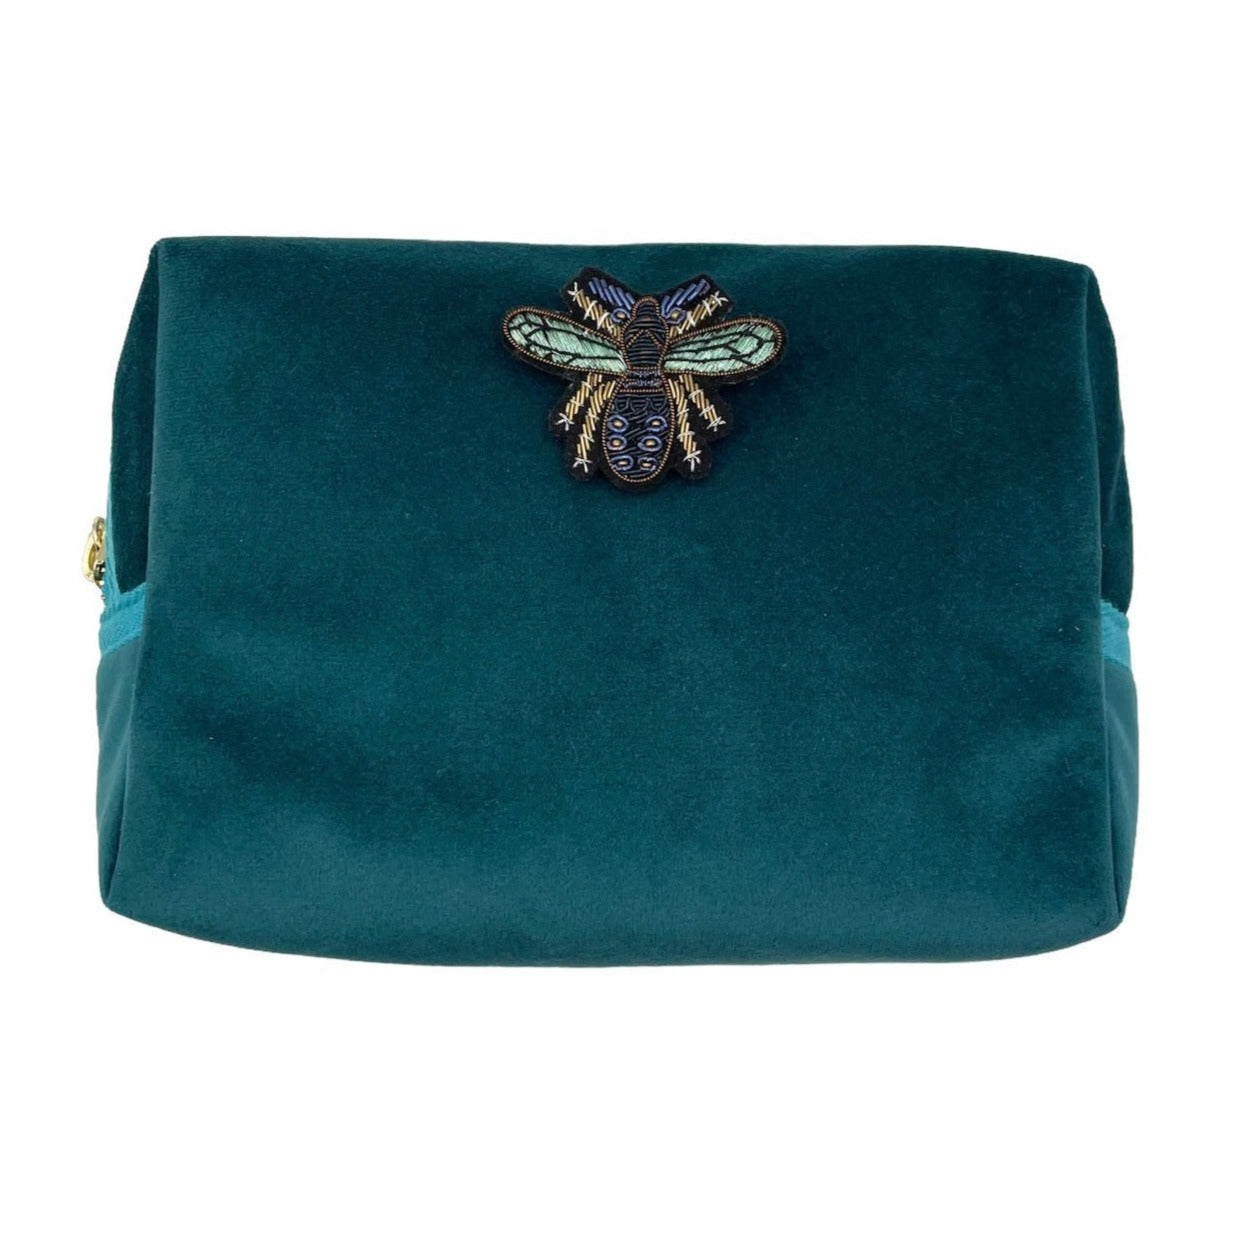 Teal make-up bag & petite insect pin - recycled velvet